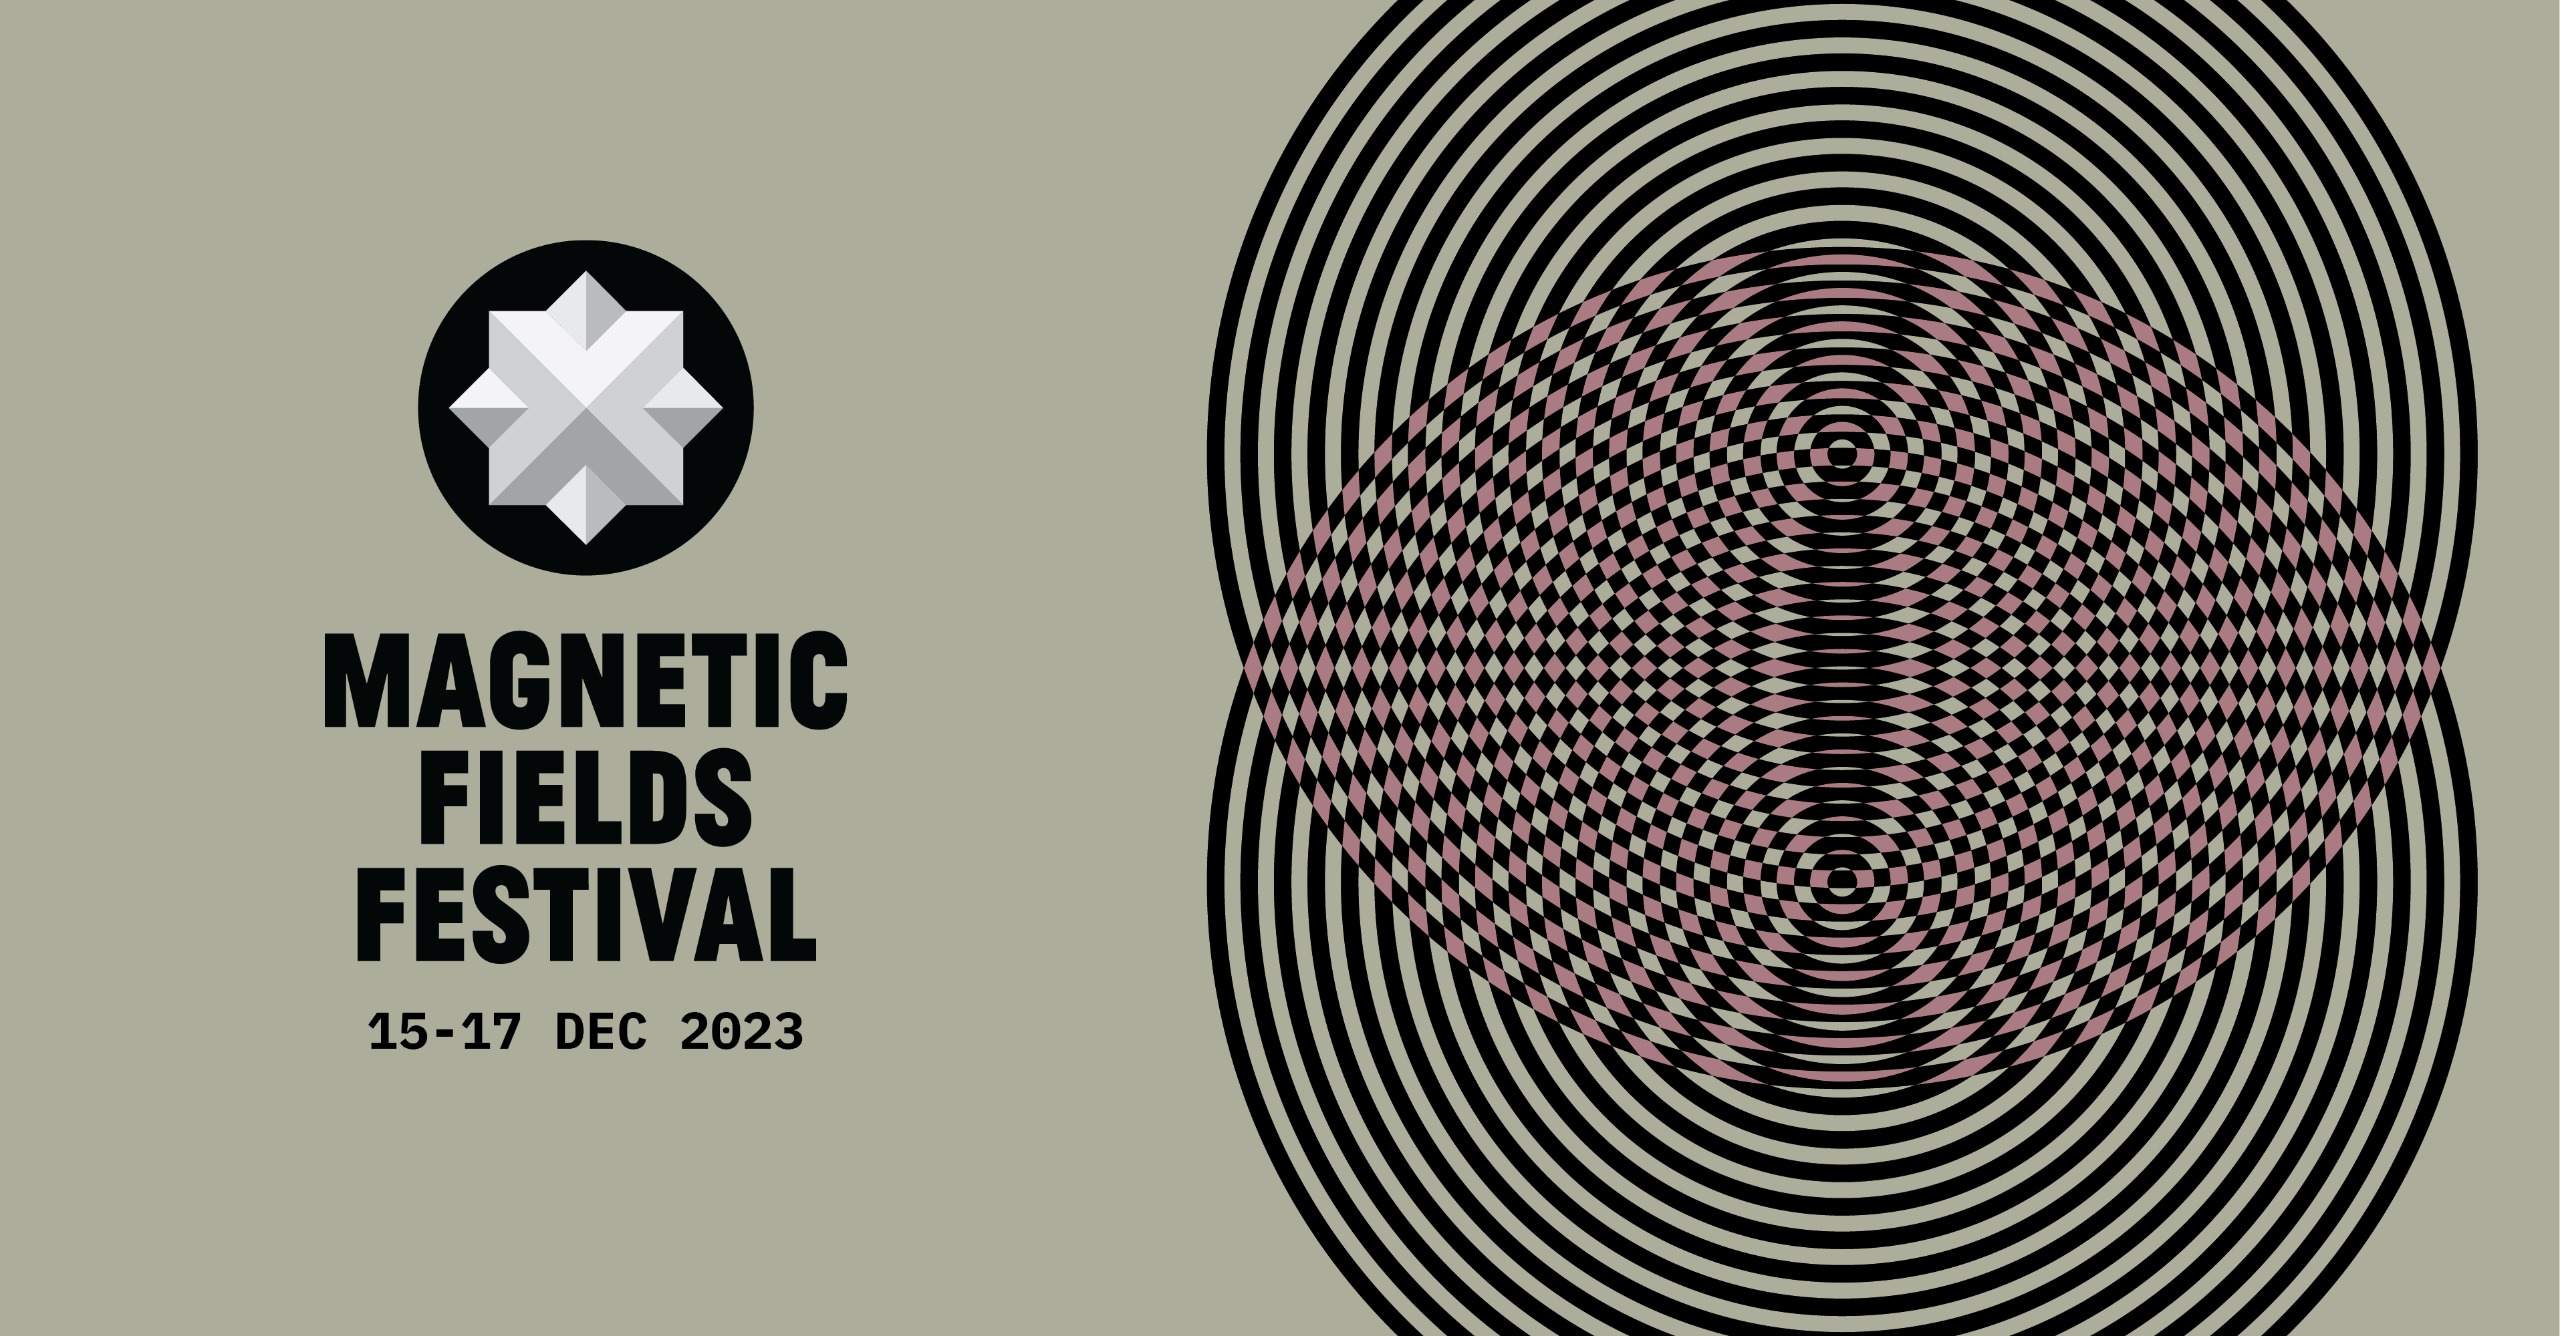 Magnetic Fields Festival 2023 - フライヤー表